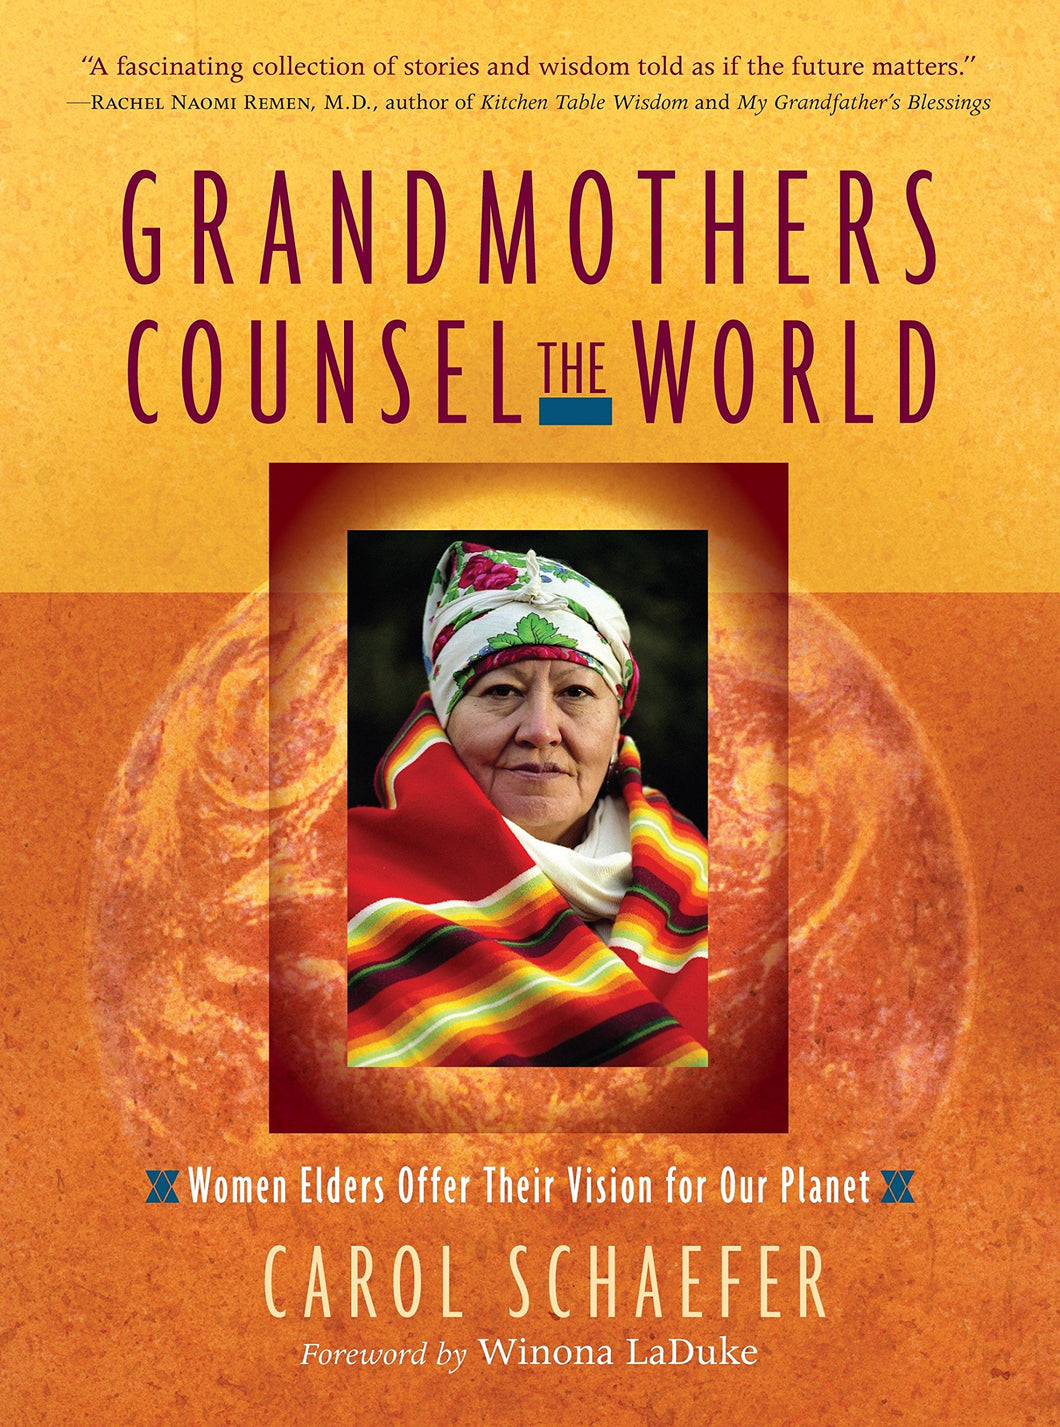 Grandmothers Counsel the World: Women Elders Offer Their Vision for Our Planet [Carol Schaefer]